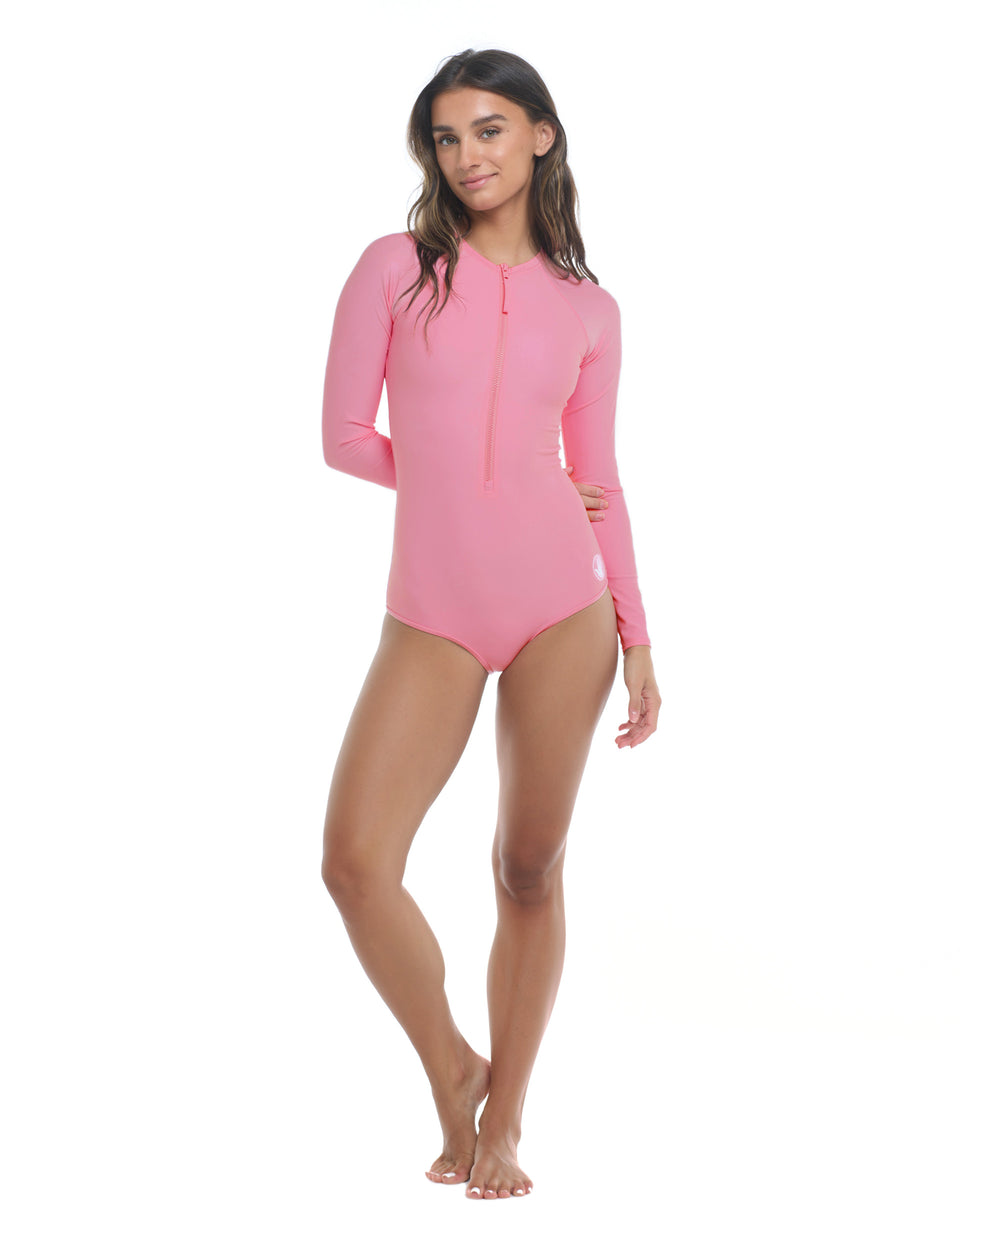 Smoothies Channel Cross-Over Paddle Suit - Pitaya